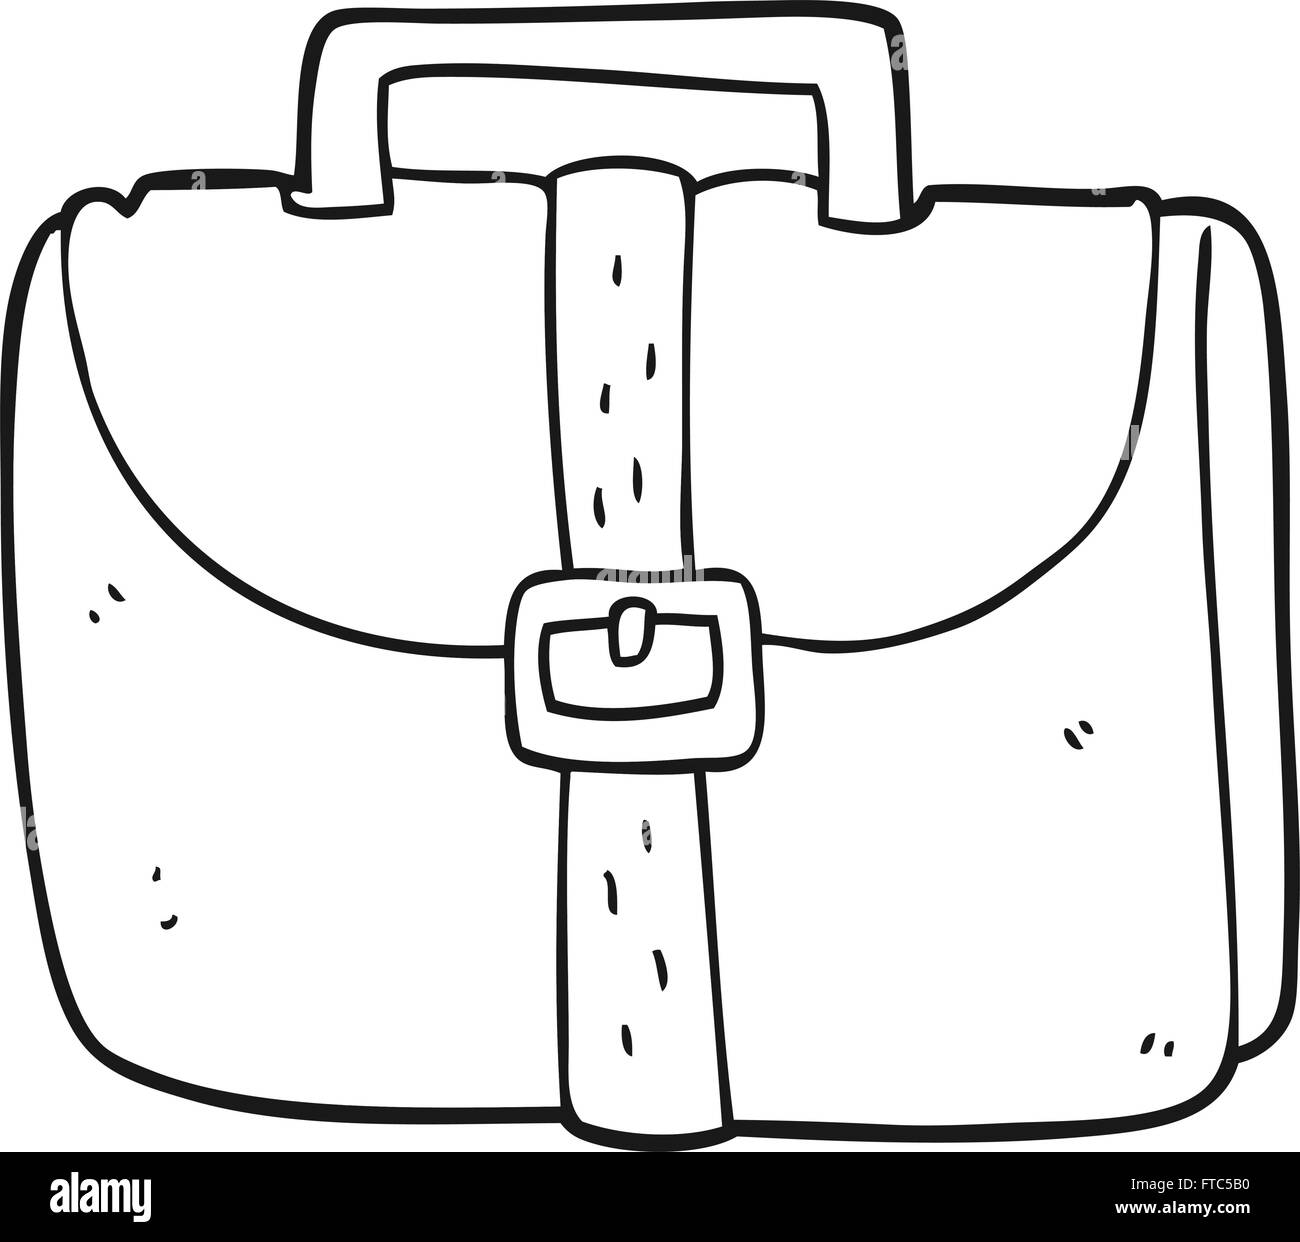 Page 2 - Freehand Drawn Cartoon Bag High Resolution Stock Photography and  Images - Alamy